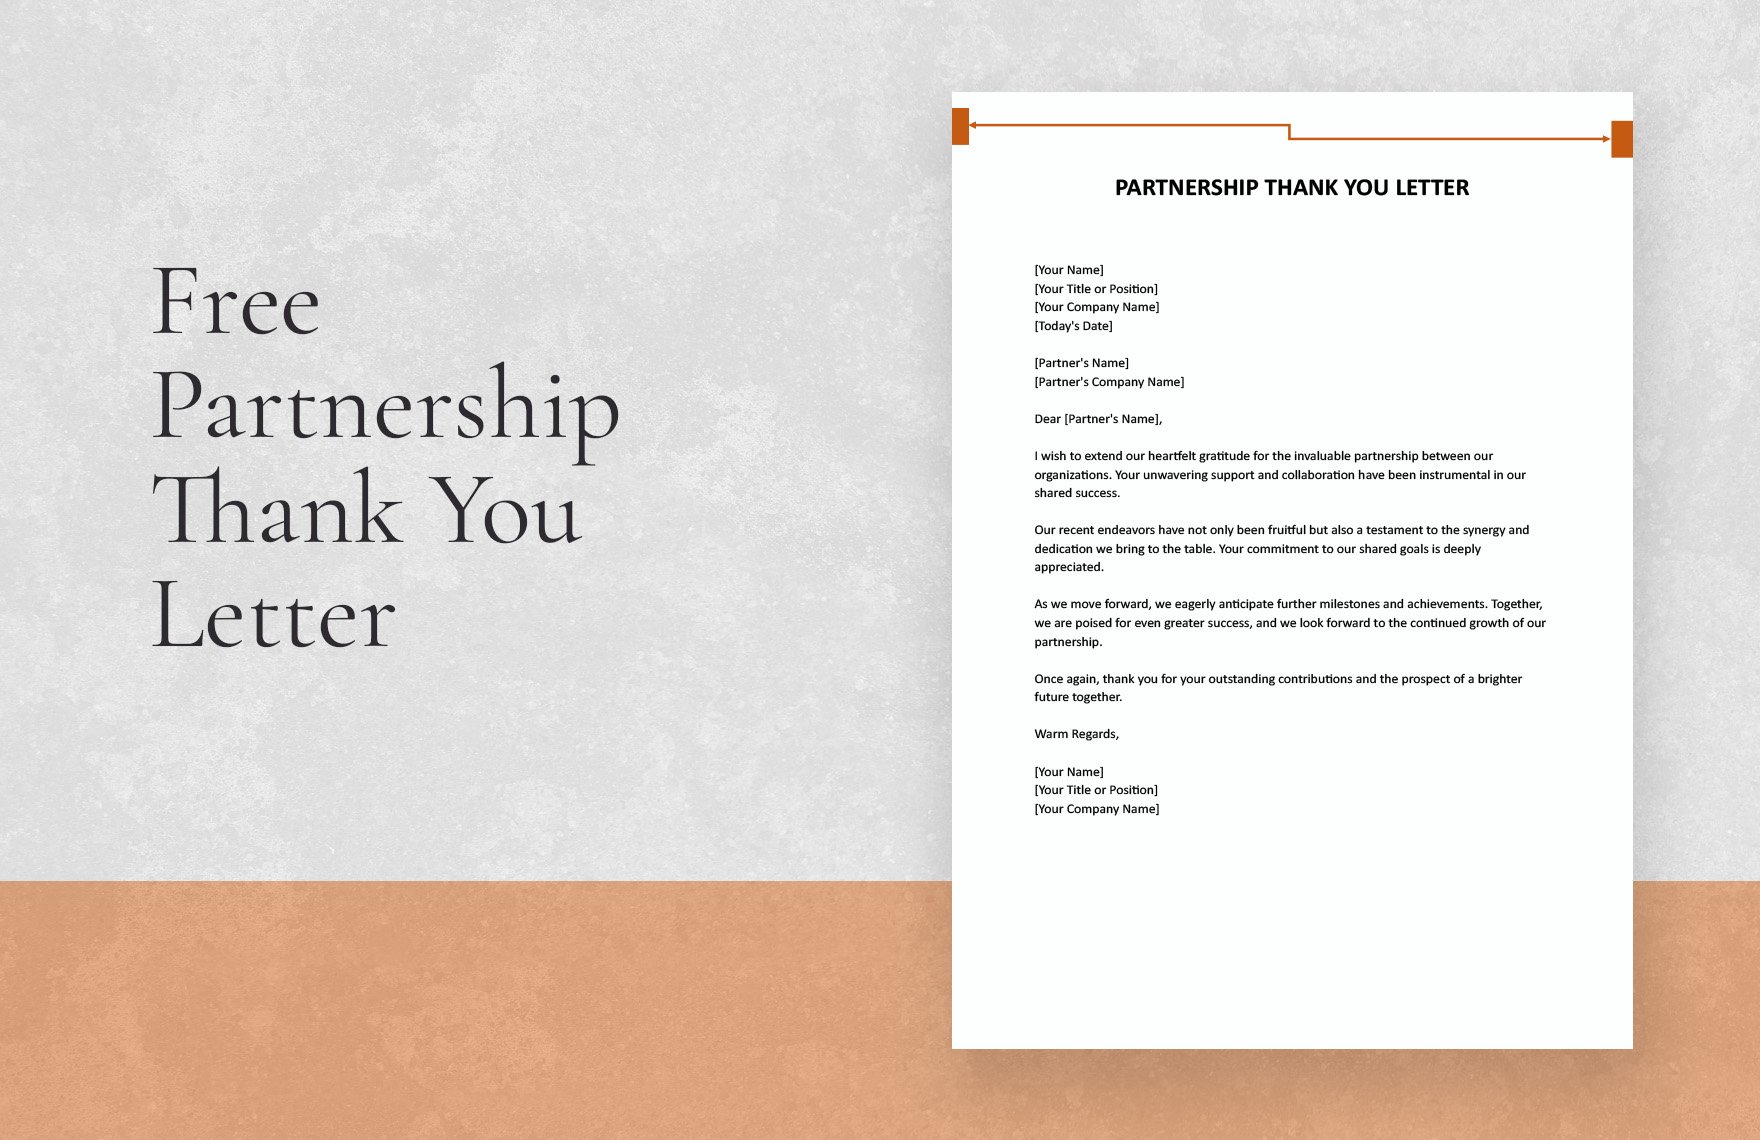 Free Partnership Thank You Letter